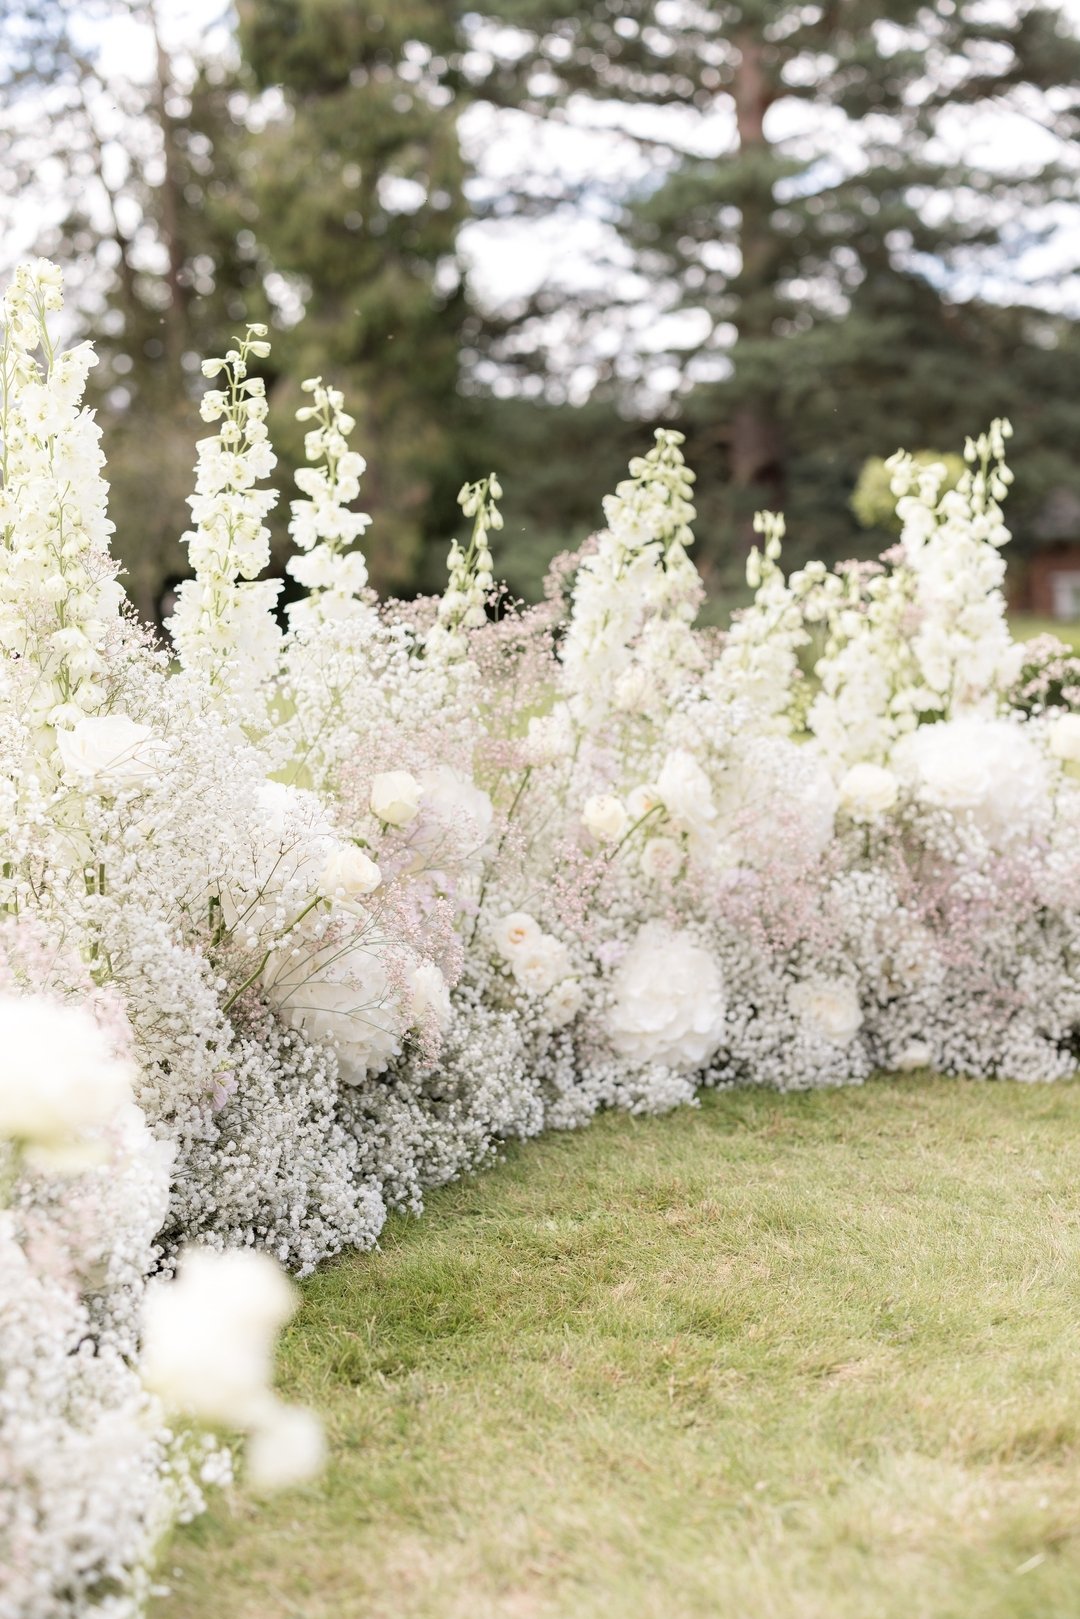 The ceremony floor meadow is proving to be a very popular feature for summer weddings! What do you think? Will replace the floral arch that has dominated wedding design for the last few years? 🤔 Loving this frothy cloud of dreams by @edwinaloweflora